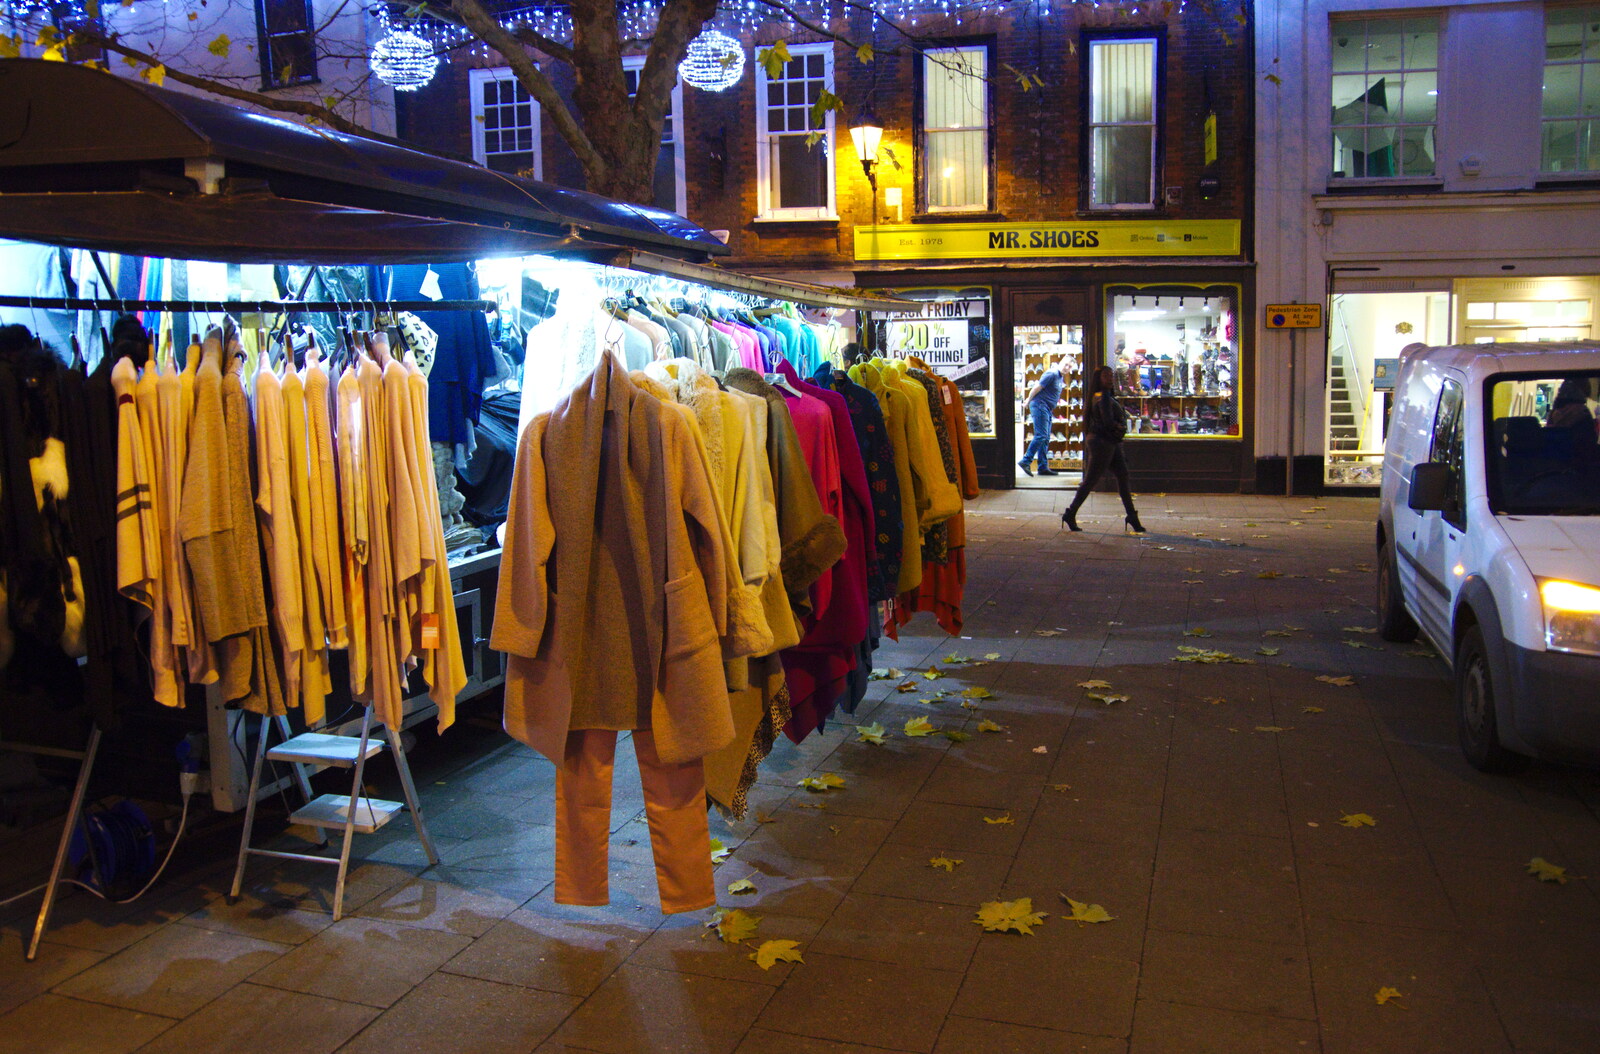 Hanging clothes on a street market stall from Pizza Express and a School Quiz, Bury St. Edmunds and Eye, Suffolk - 30th November 2019